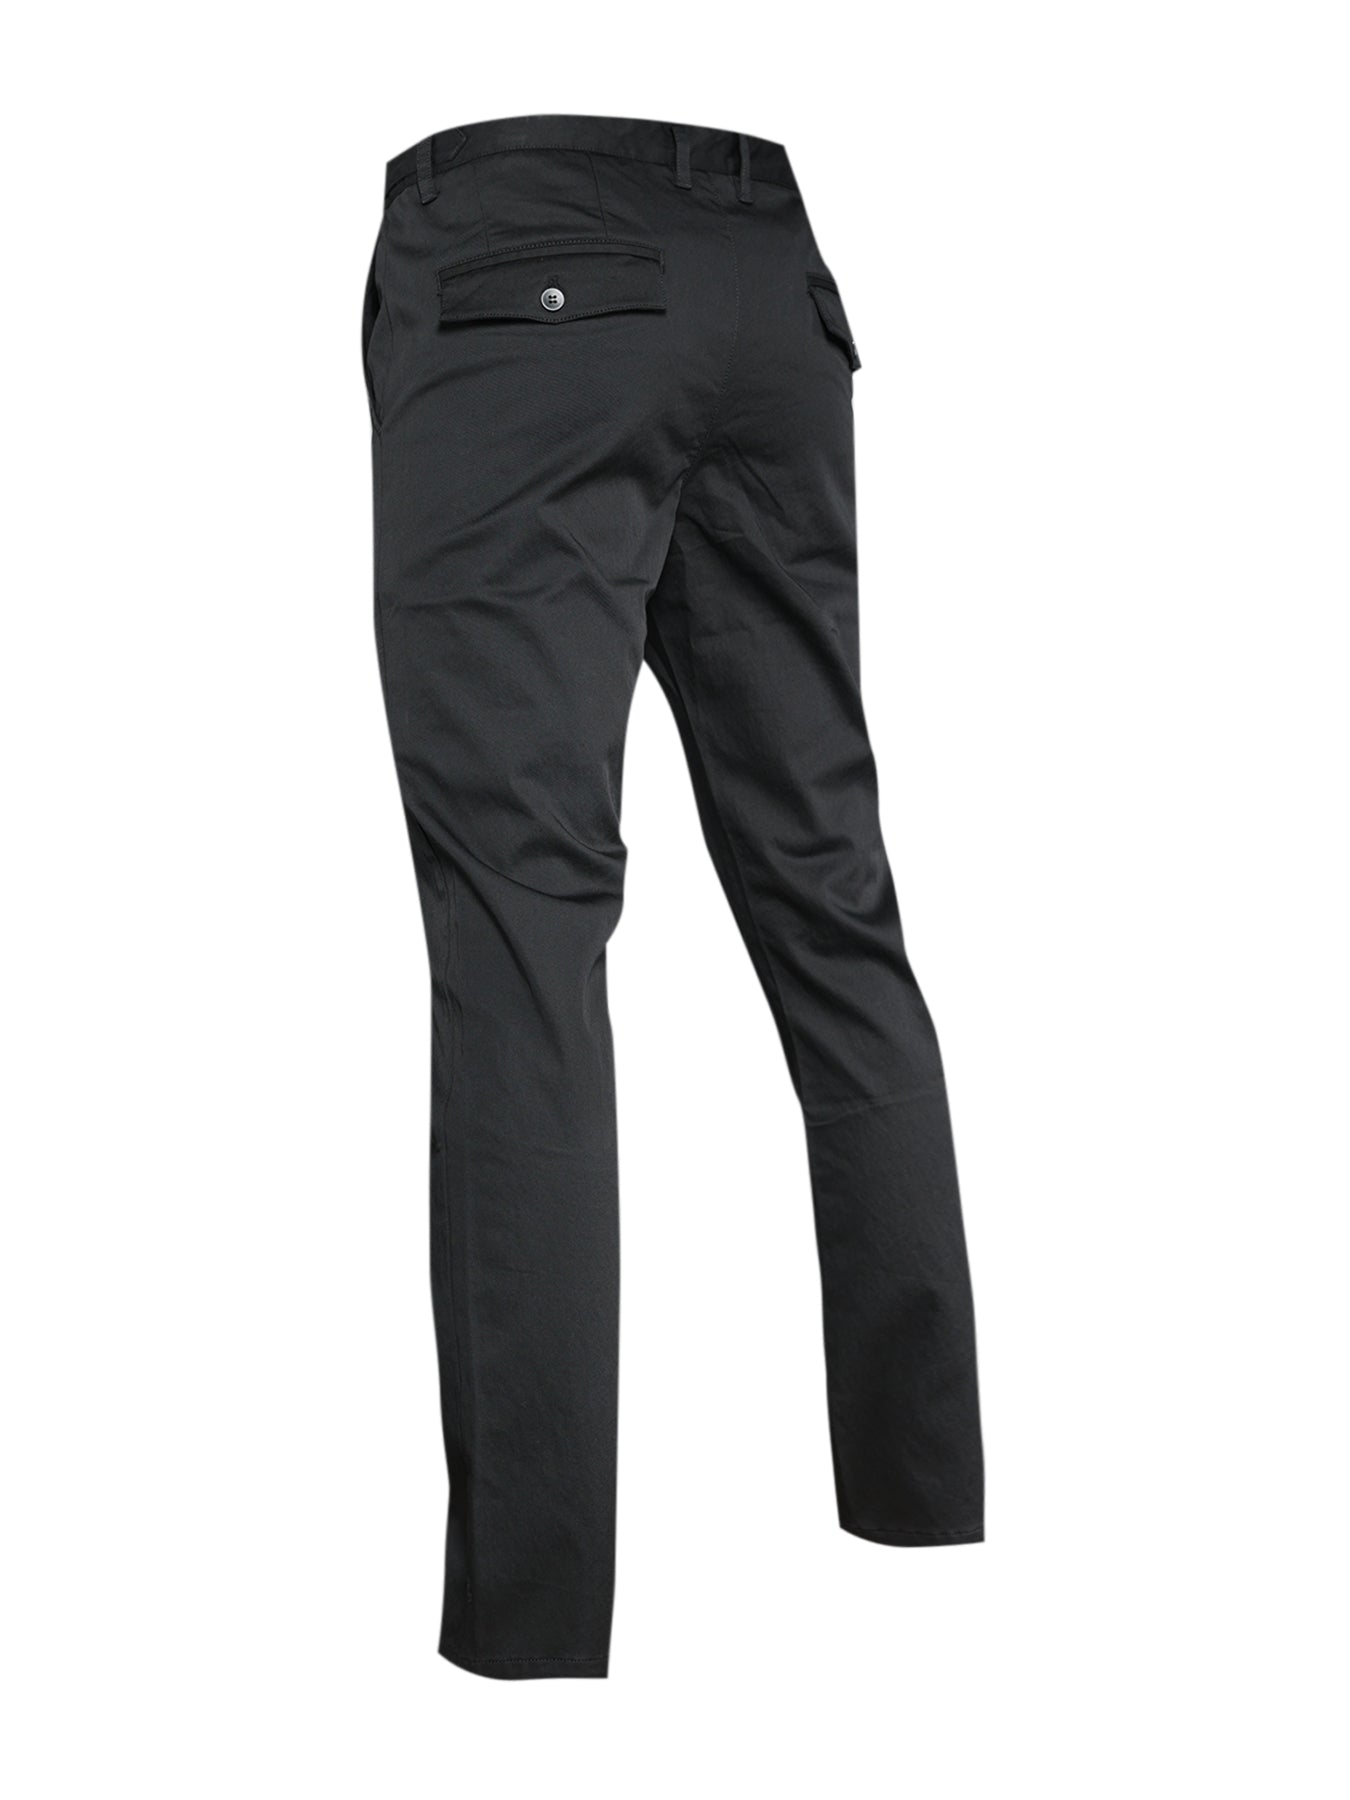 Skinny Chino Pants with Flip Pockets - XIOS America